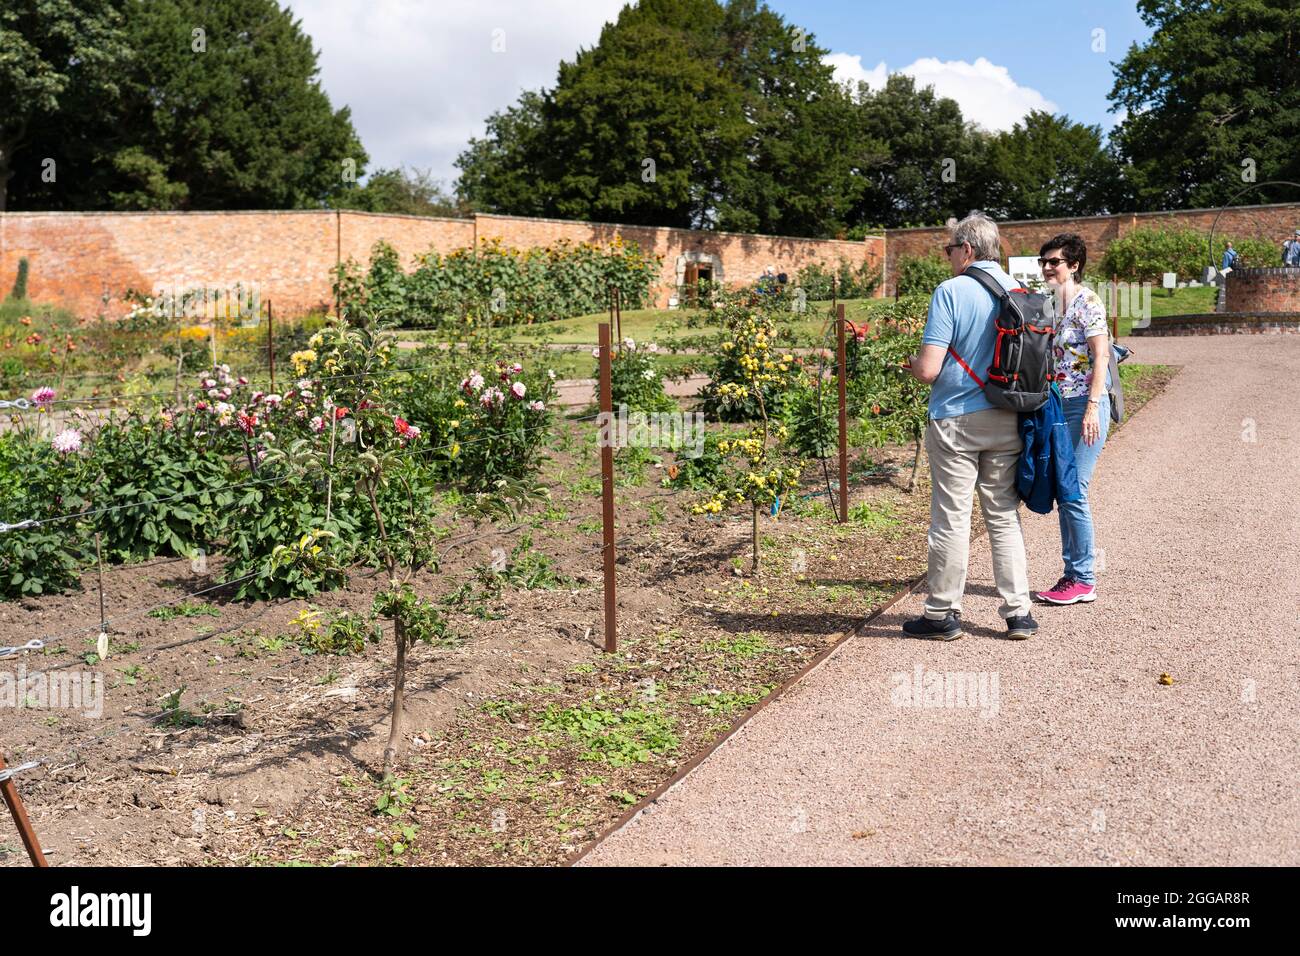 Visitors looking at plants and flowers in the renovated historic Georgian Walled Gardens of Croome Court, Worcestershire, UK Stock Photo